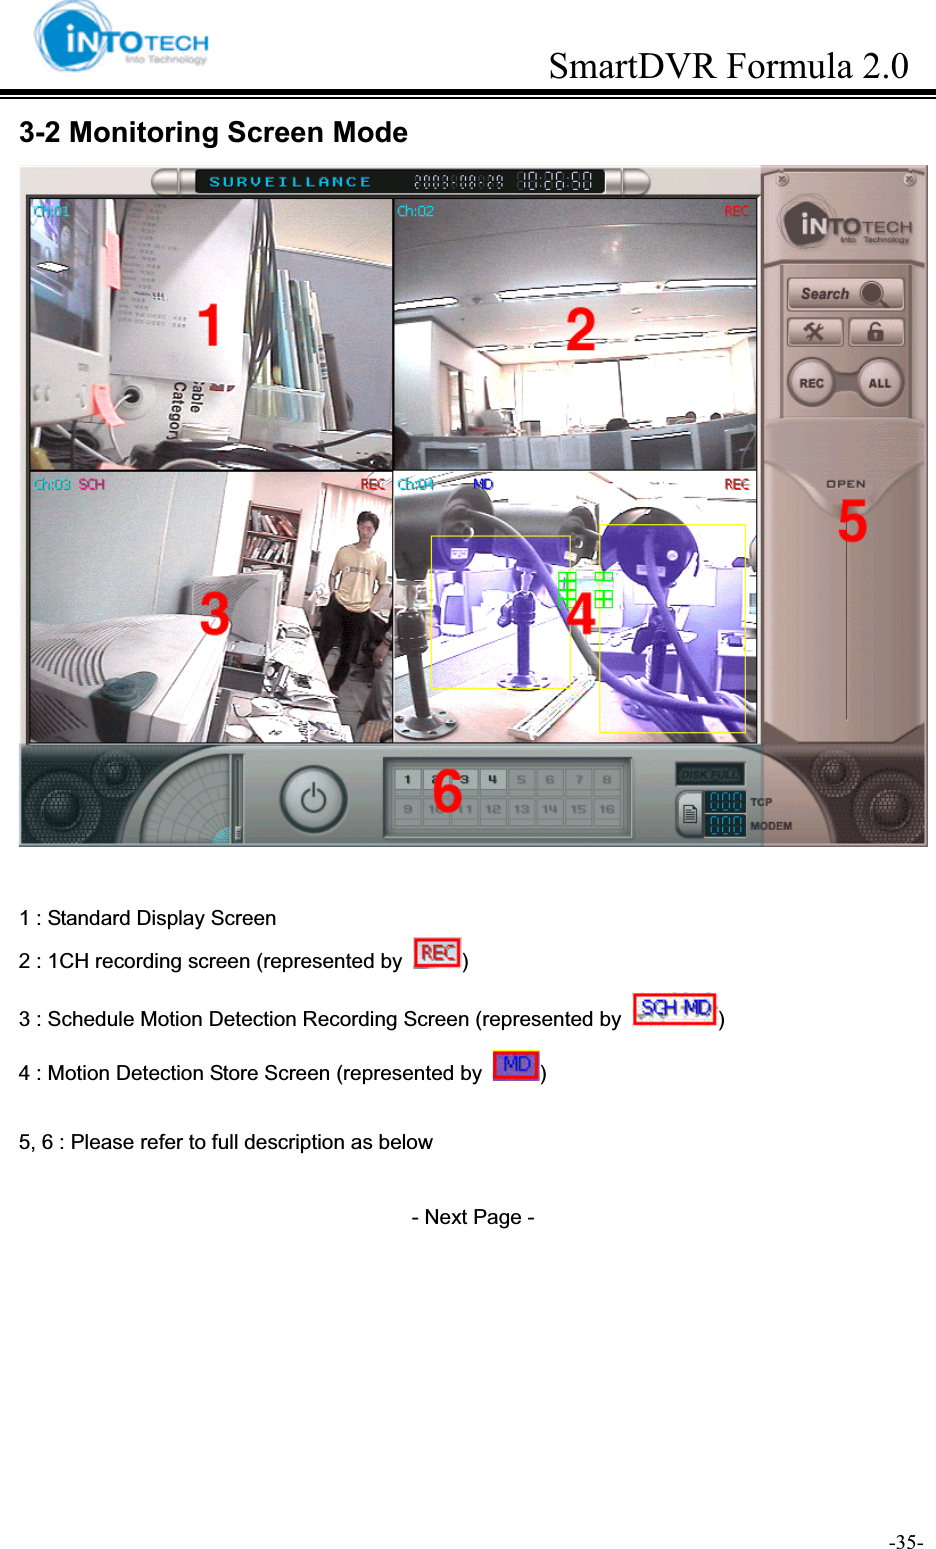 GGGGGGGGGGGGGGGGGGGGGGGGGGGGGGGSmartDVR Formula 2.0G                                                                               -35-G3-2 Monitoring Screen Mode 1 : Standard Display Screen   2 : 1CH recording screen (represented by  )3 : Schedule Motion Detection Recording Screen (represented by  )4 : Motion Detection Store Screen (represented by  )5, 6 : Please refer to full description as below - Next Page - 